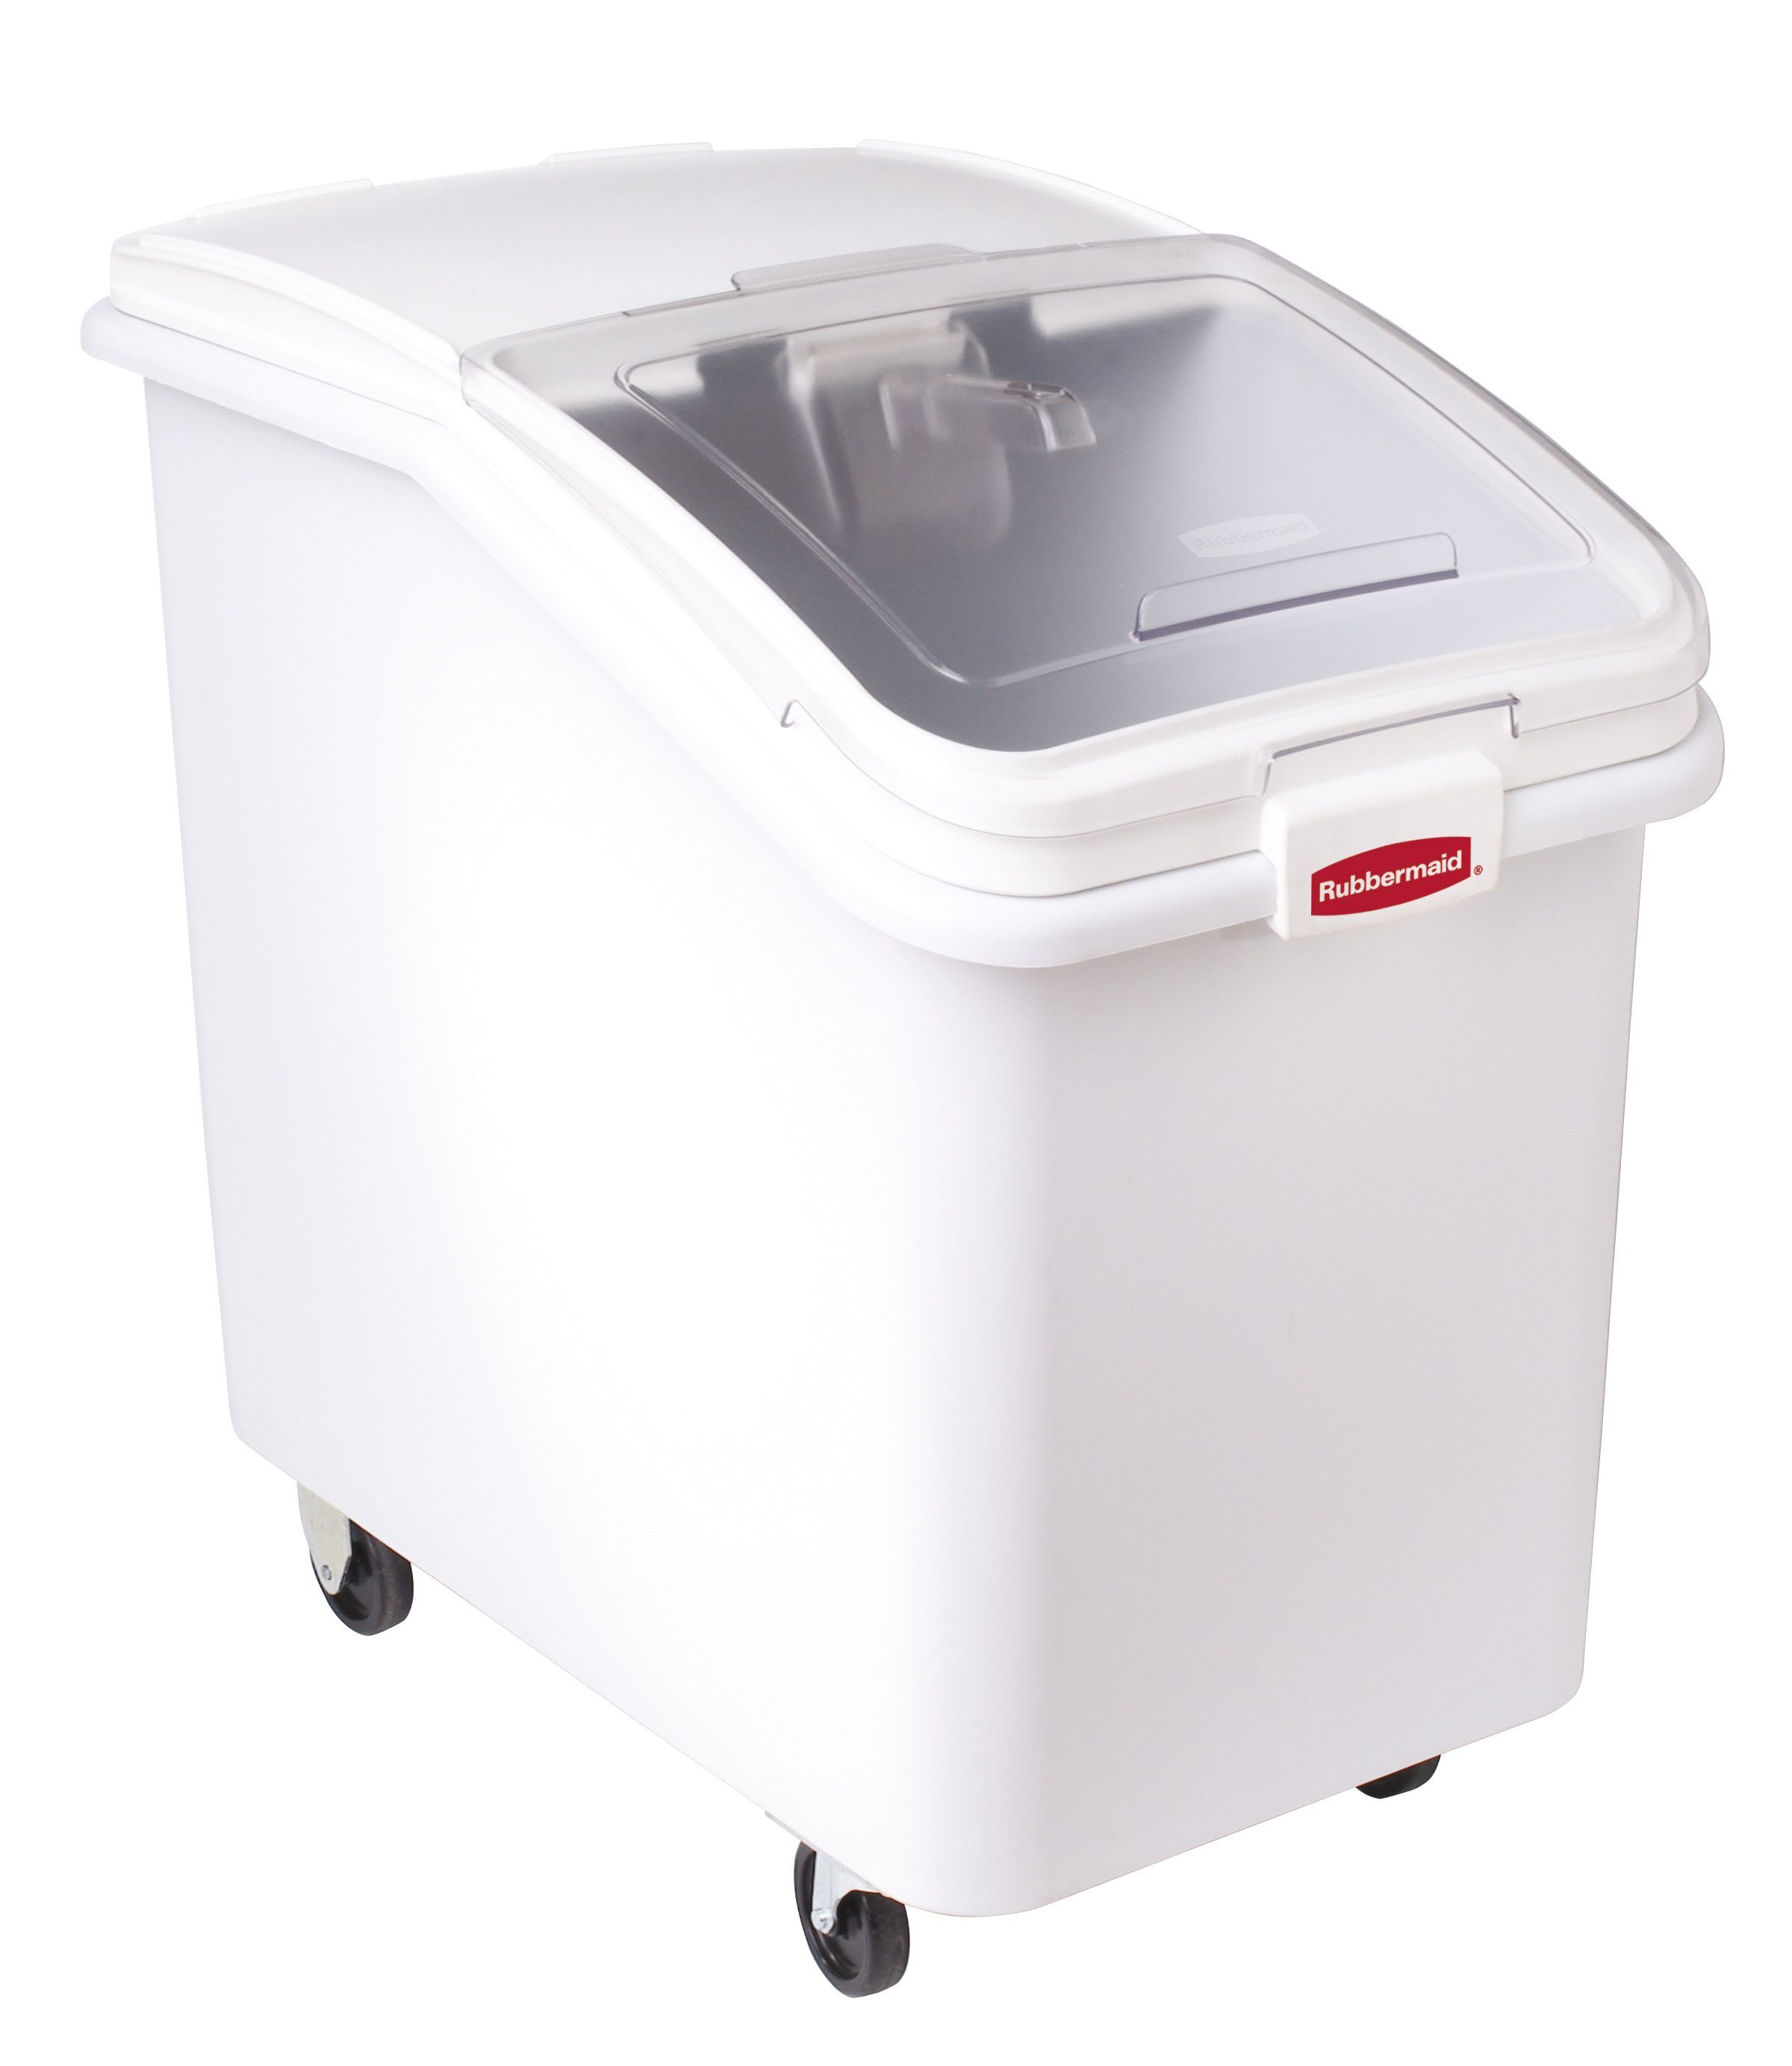 Rubbermaid Voorraadcontainer 116 ltr, Rubbermaid, model: VB 003603, wit, transparant